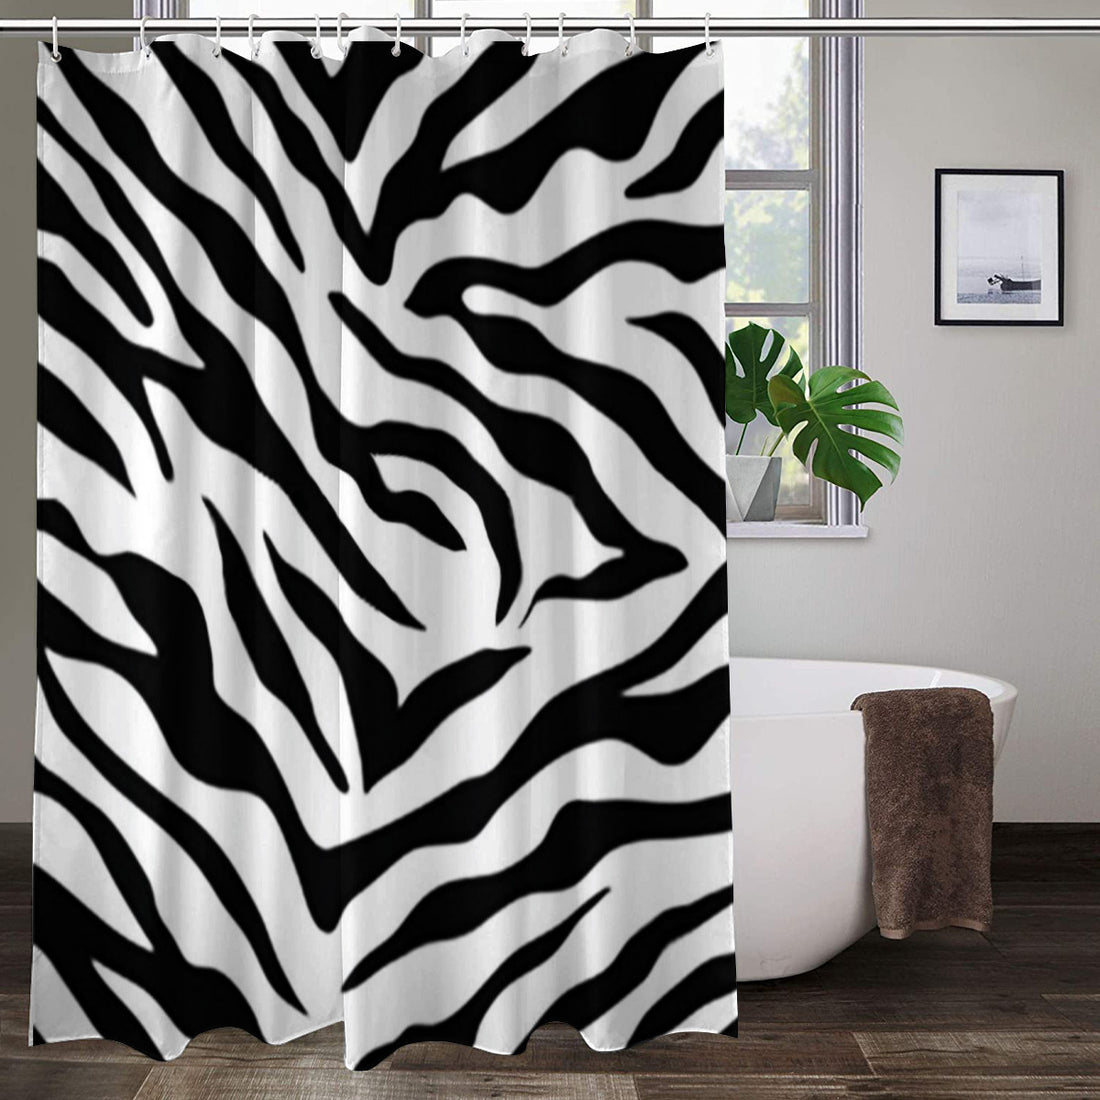 Shower Curtain Zebra, Tiger decoration Home-clothes-jewelry